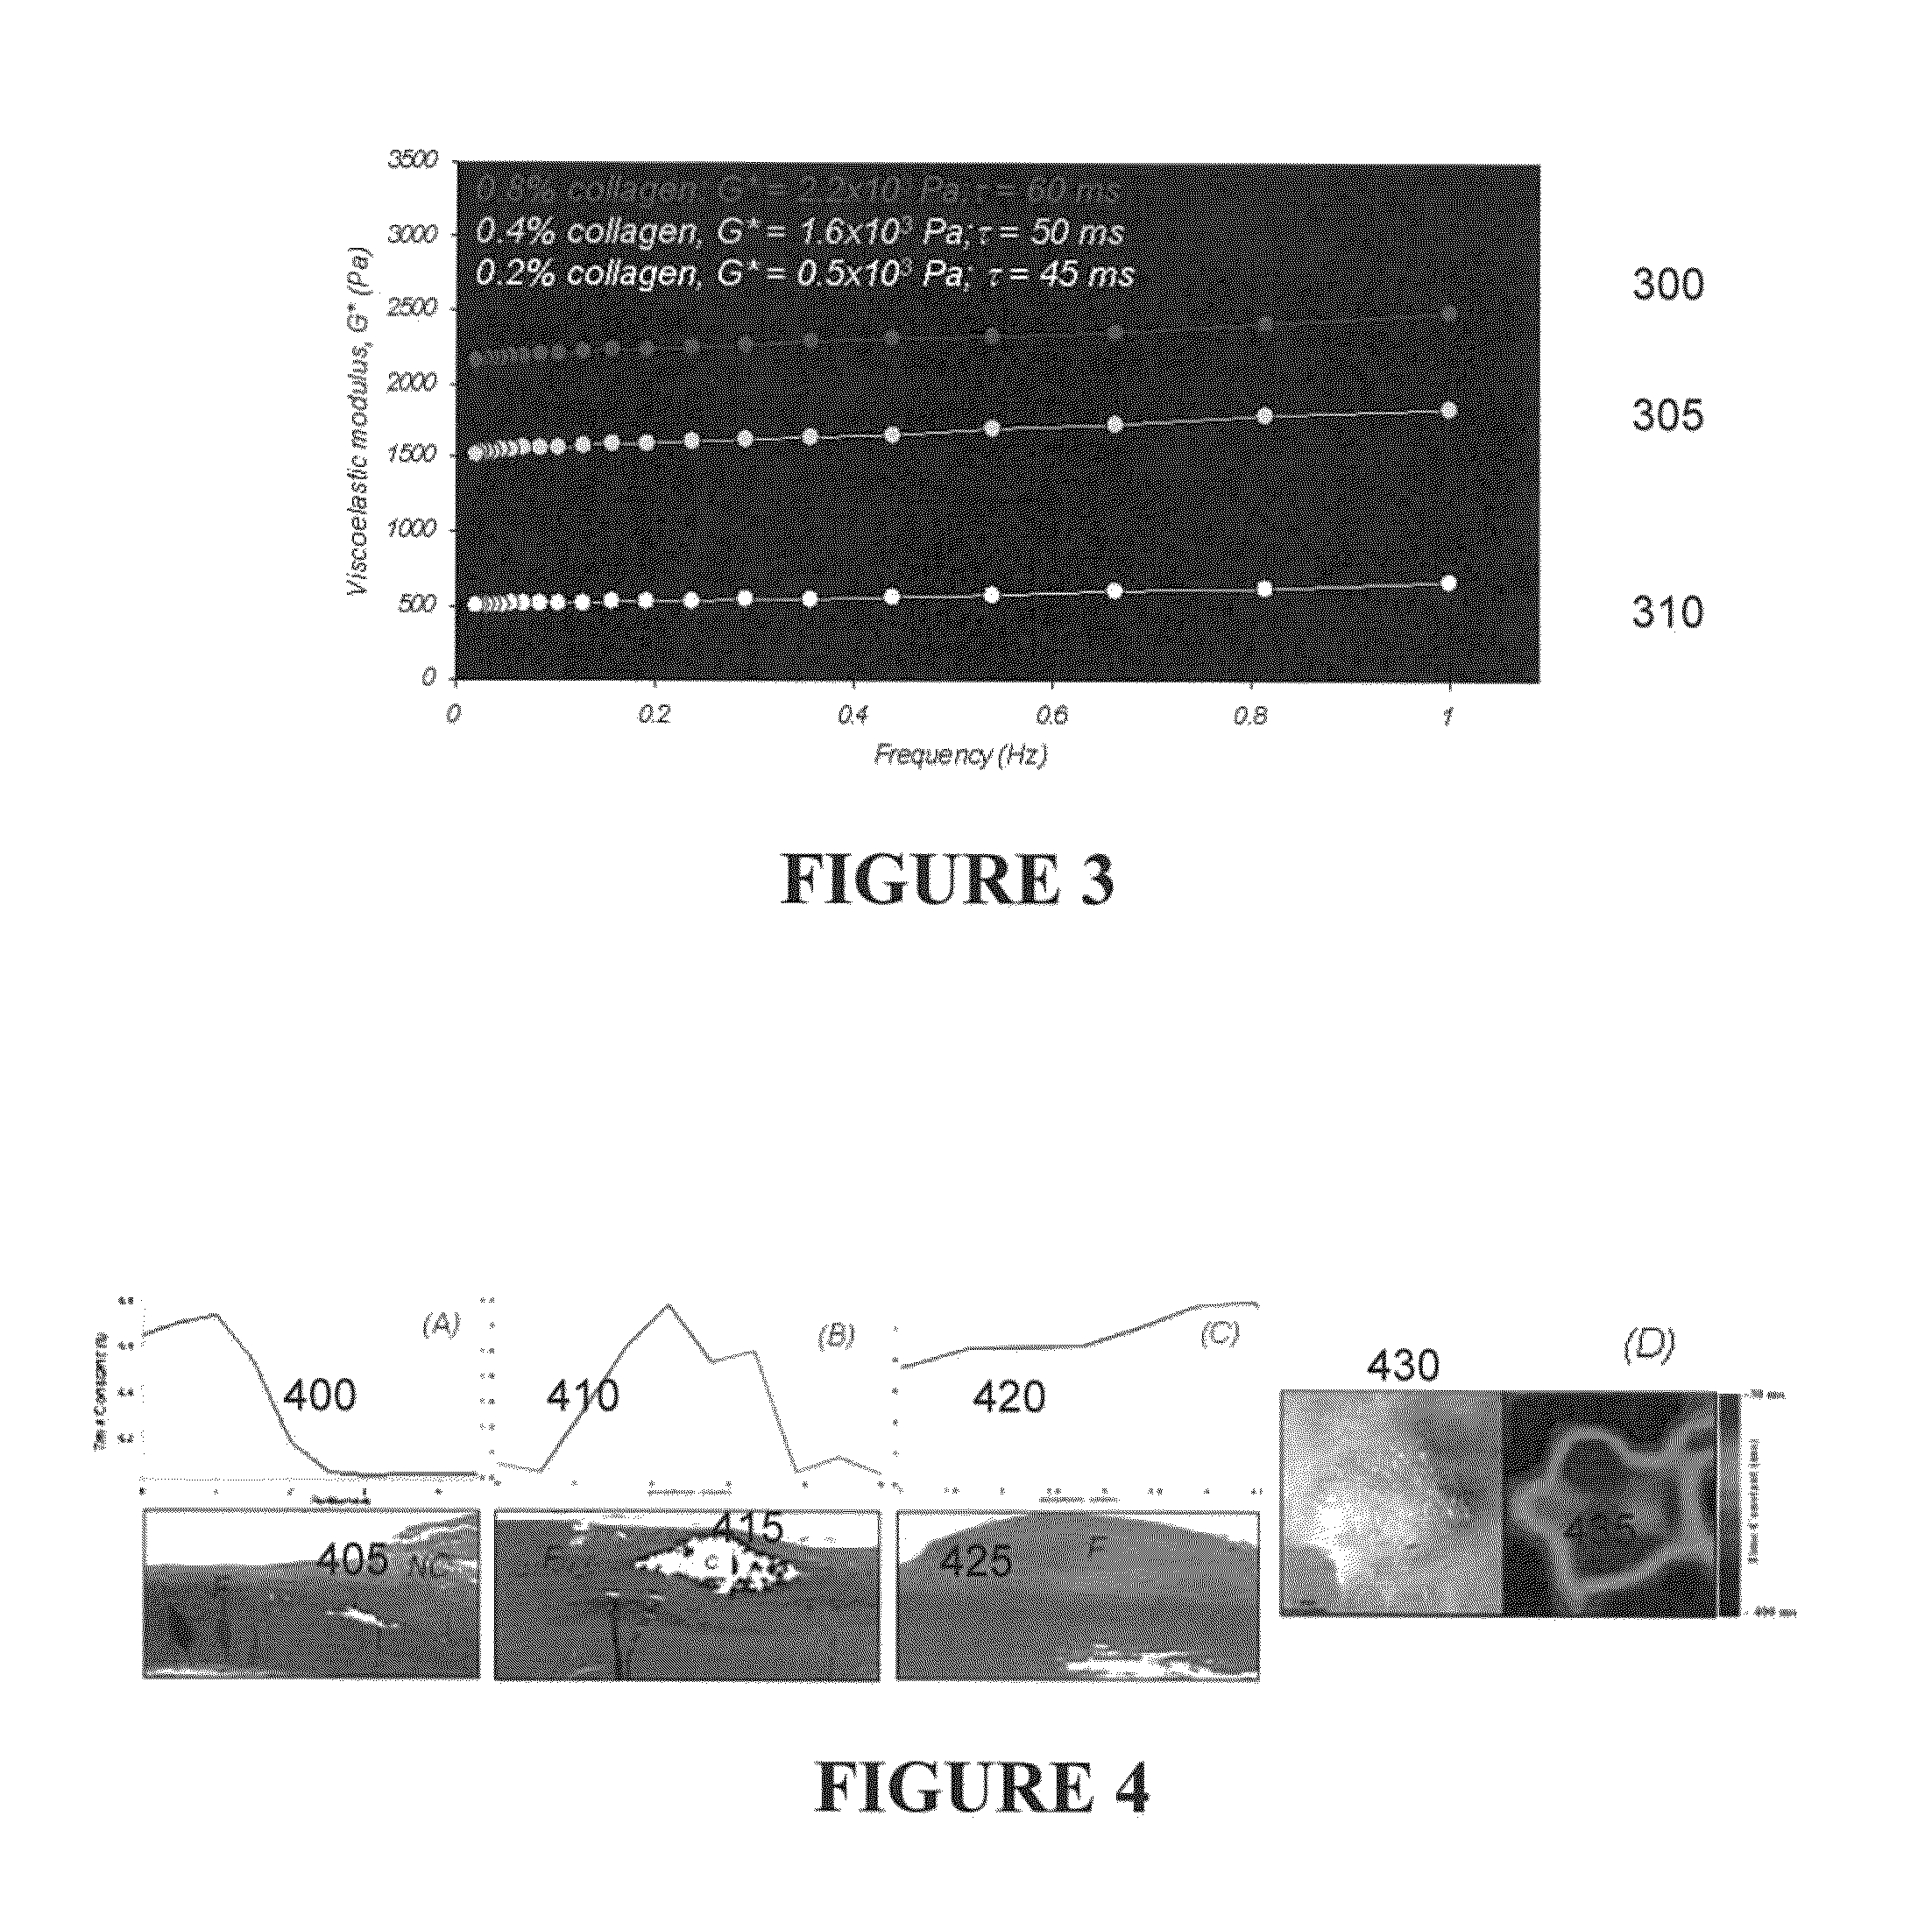 Non-contact optical system, computer-accessible medium and method for measurement at least one mechanical property of tissue using coherent speckle technique(s)